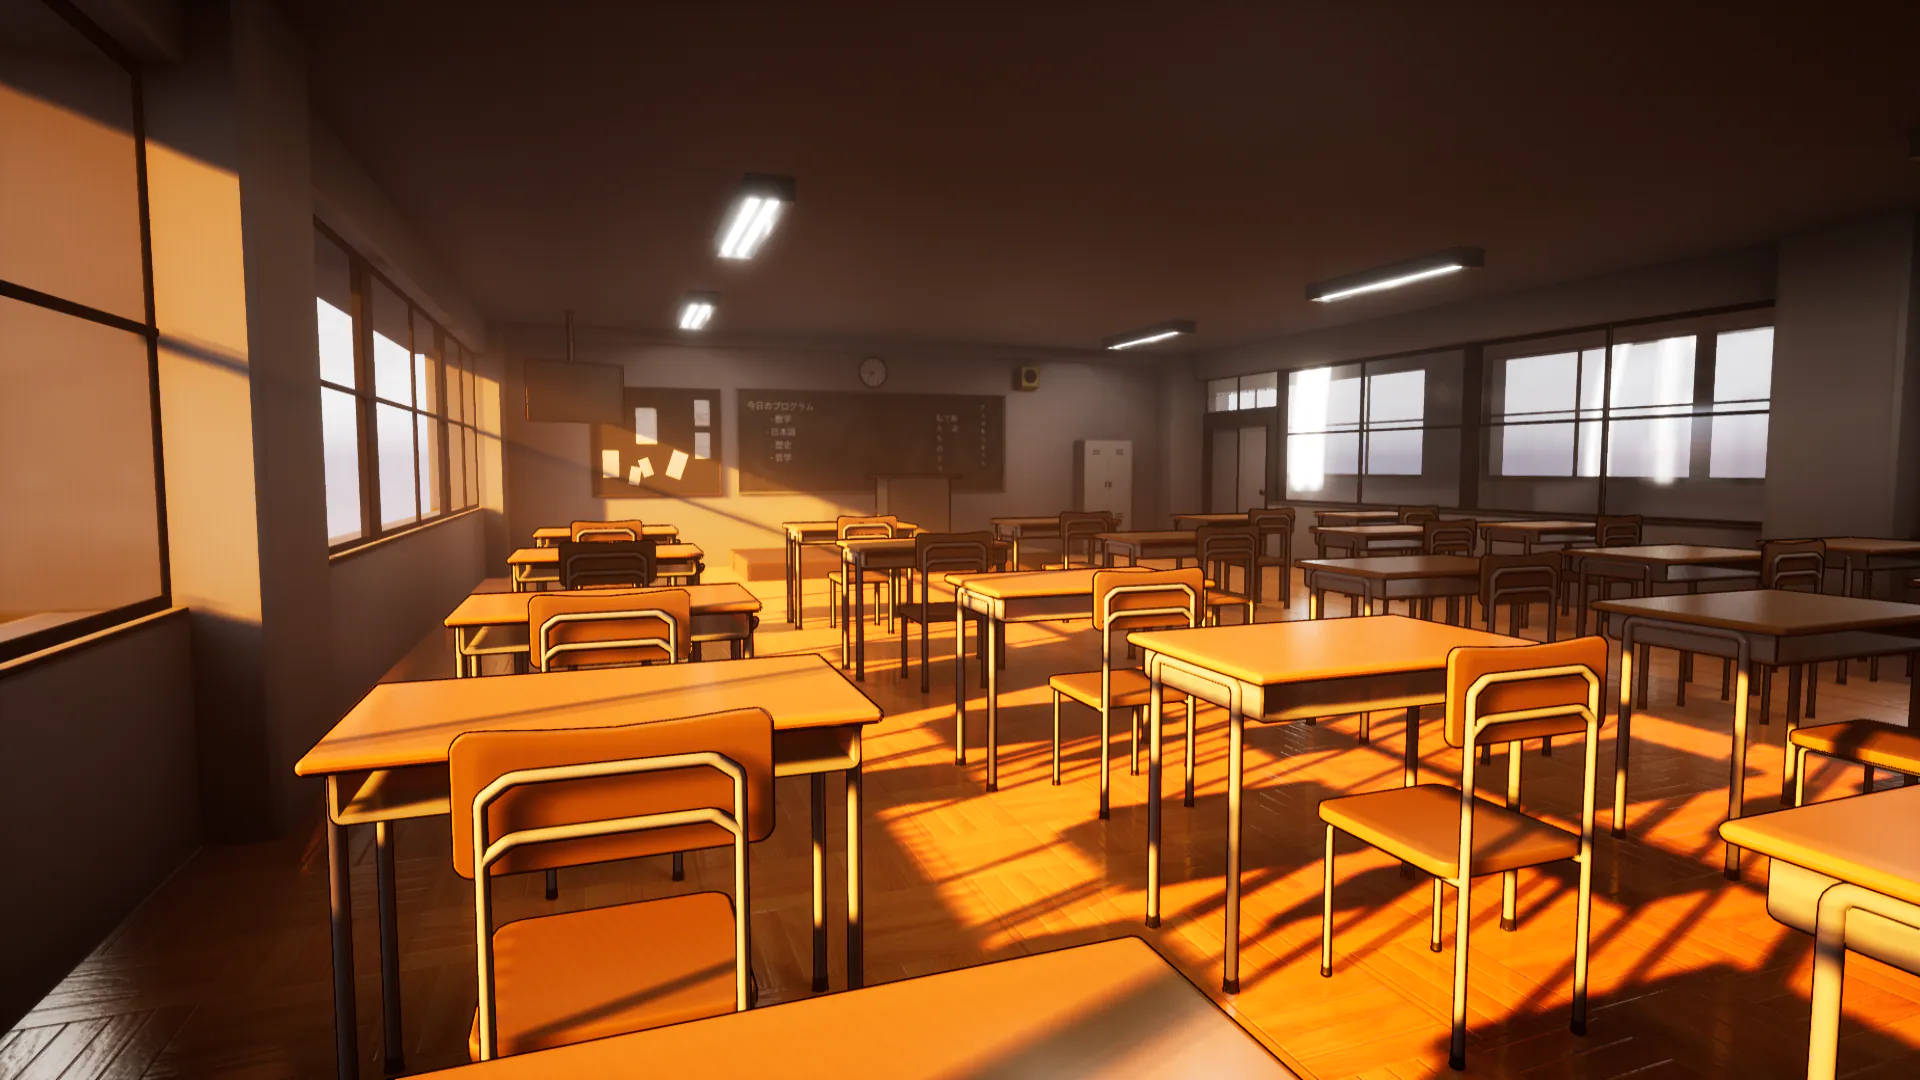 Graphic Art Classroom Bathed In Sunlight